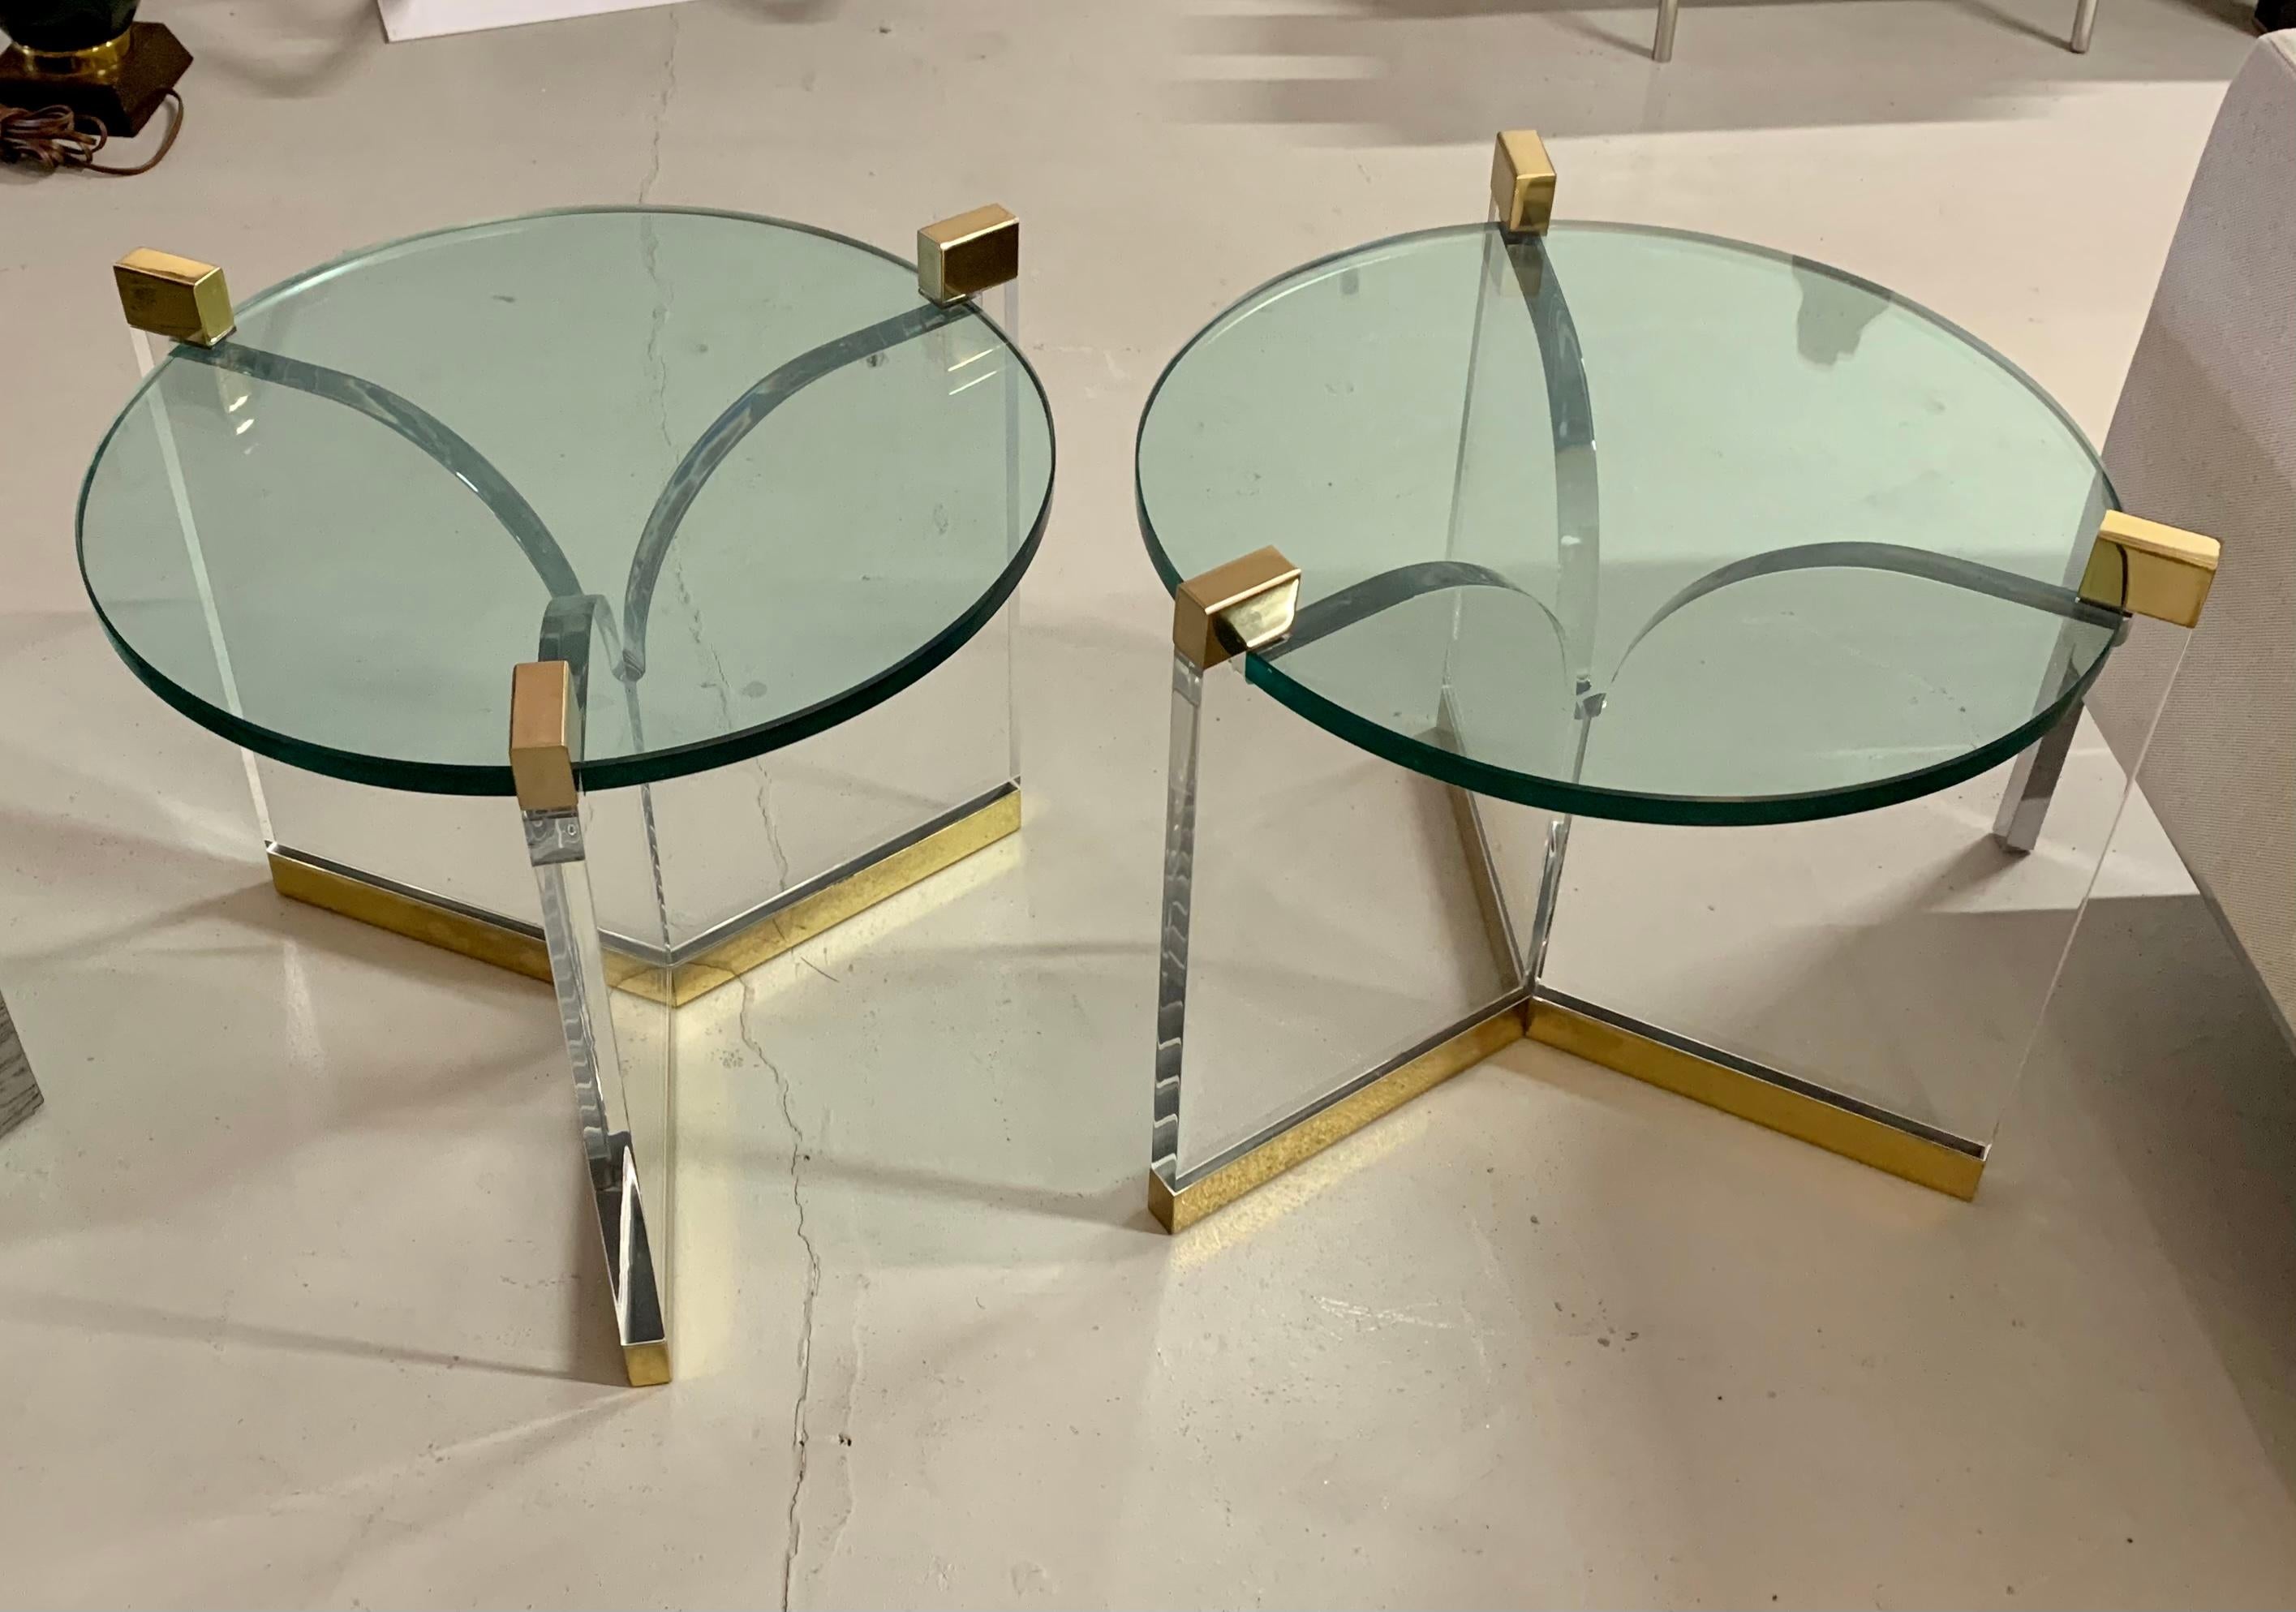 A pair of Charles Hollis Jones trefoil tables in brass, Lucite and glass. These are vintage tables, not new production. The glass top diameter alone is 20 inches and measuring taking into account the ends it is 22 1/2 inches in diameter. The brass